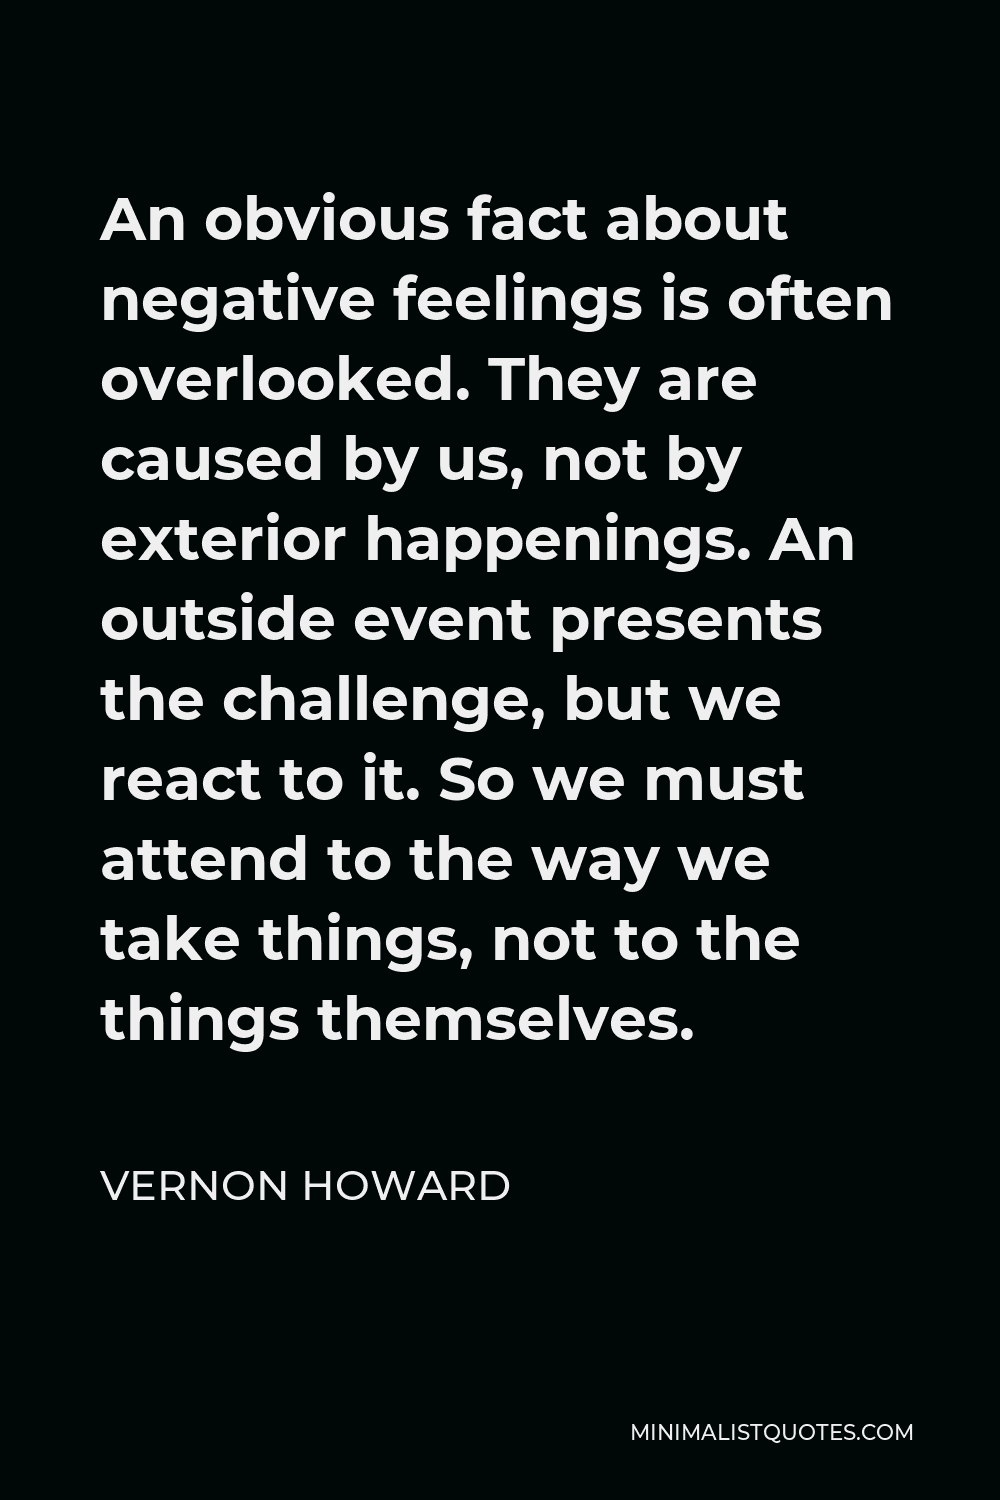 Vernon Howard Quote - An obvious fact about negative feelings is often overlooked. They are caused by us, not by exterior happenings. An outside event presents the challenge, but we react to it. So we must attend to the way we take things, not to the things themselves.